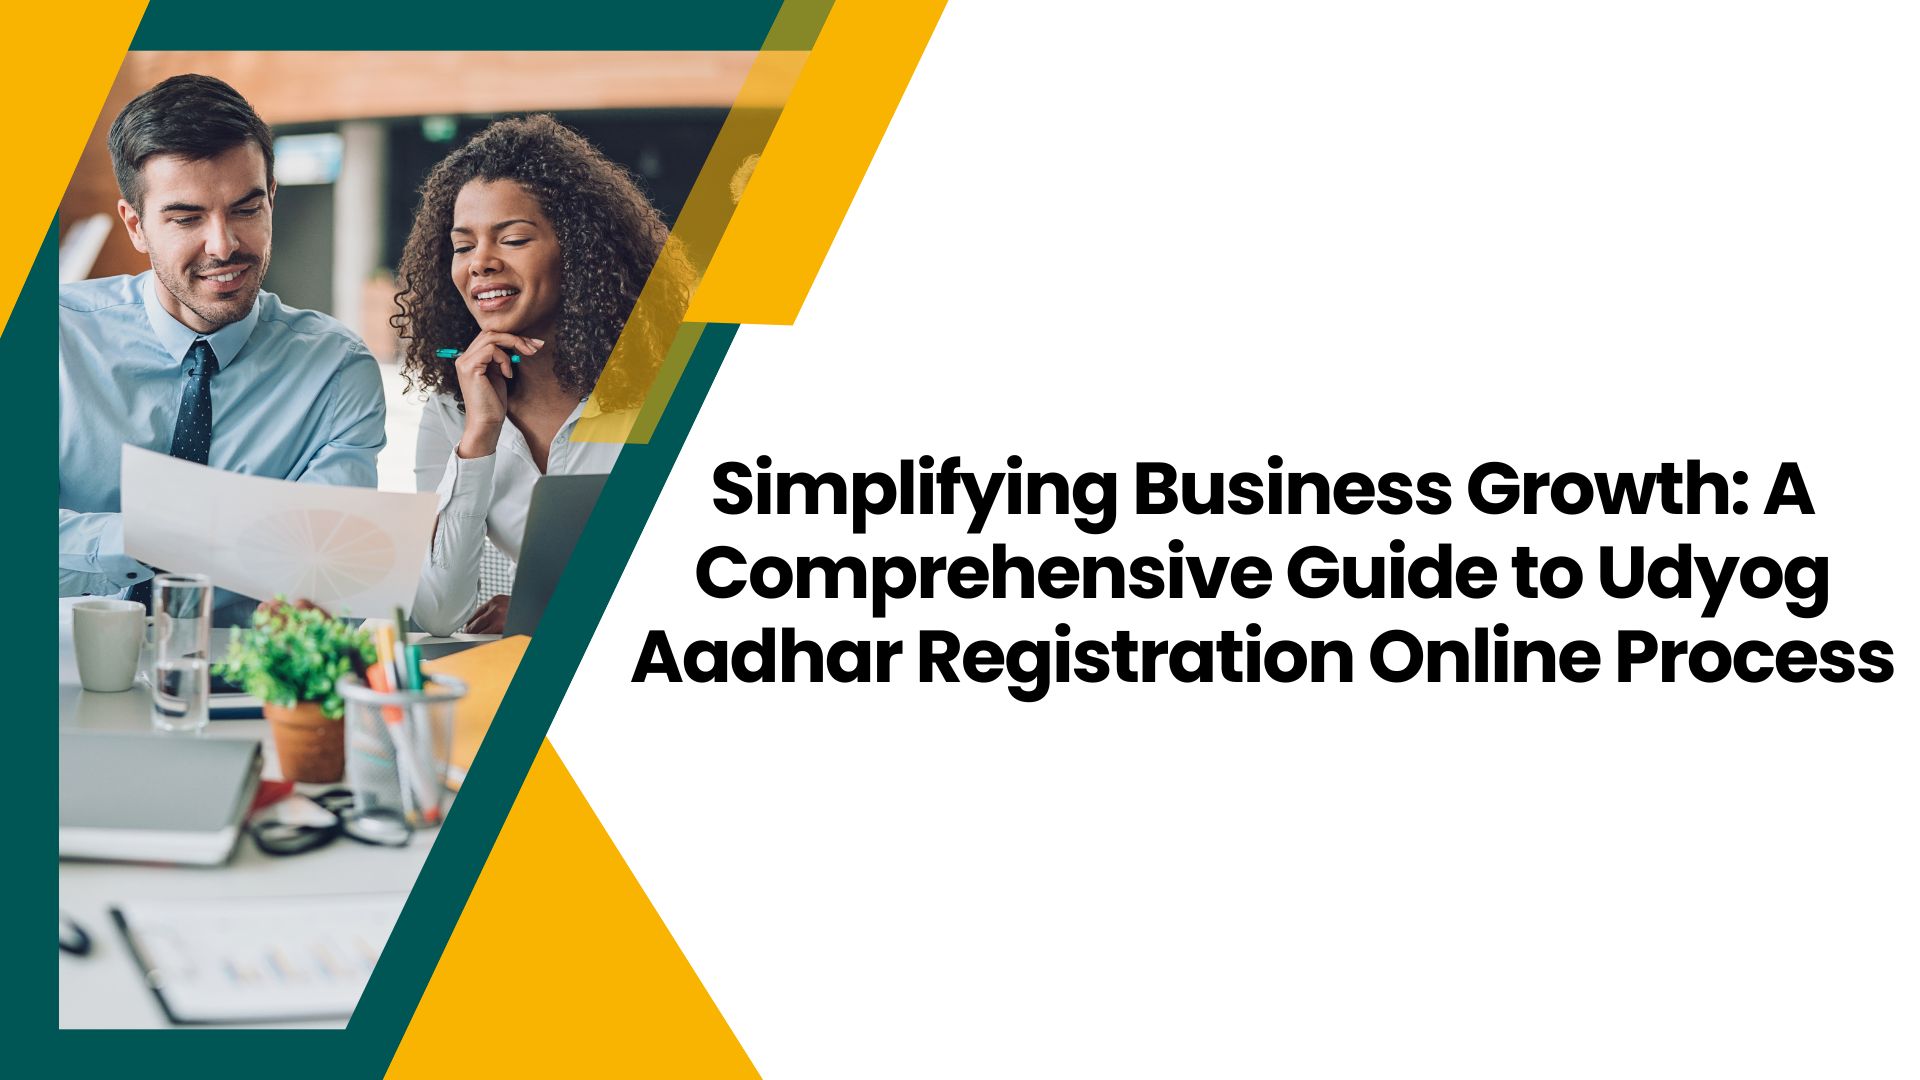 Simplifying Business Growth: A Comprehensive Guide to Udyog Aadhar Registration Online Process